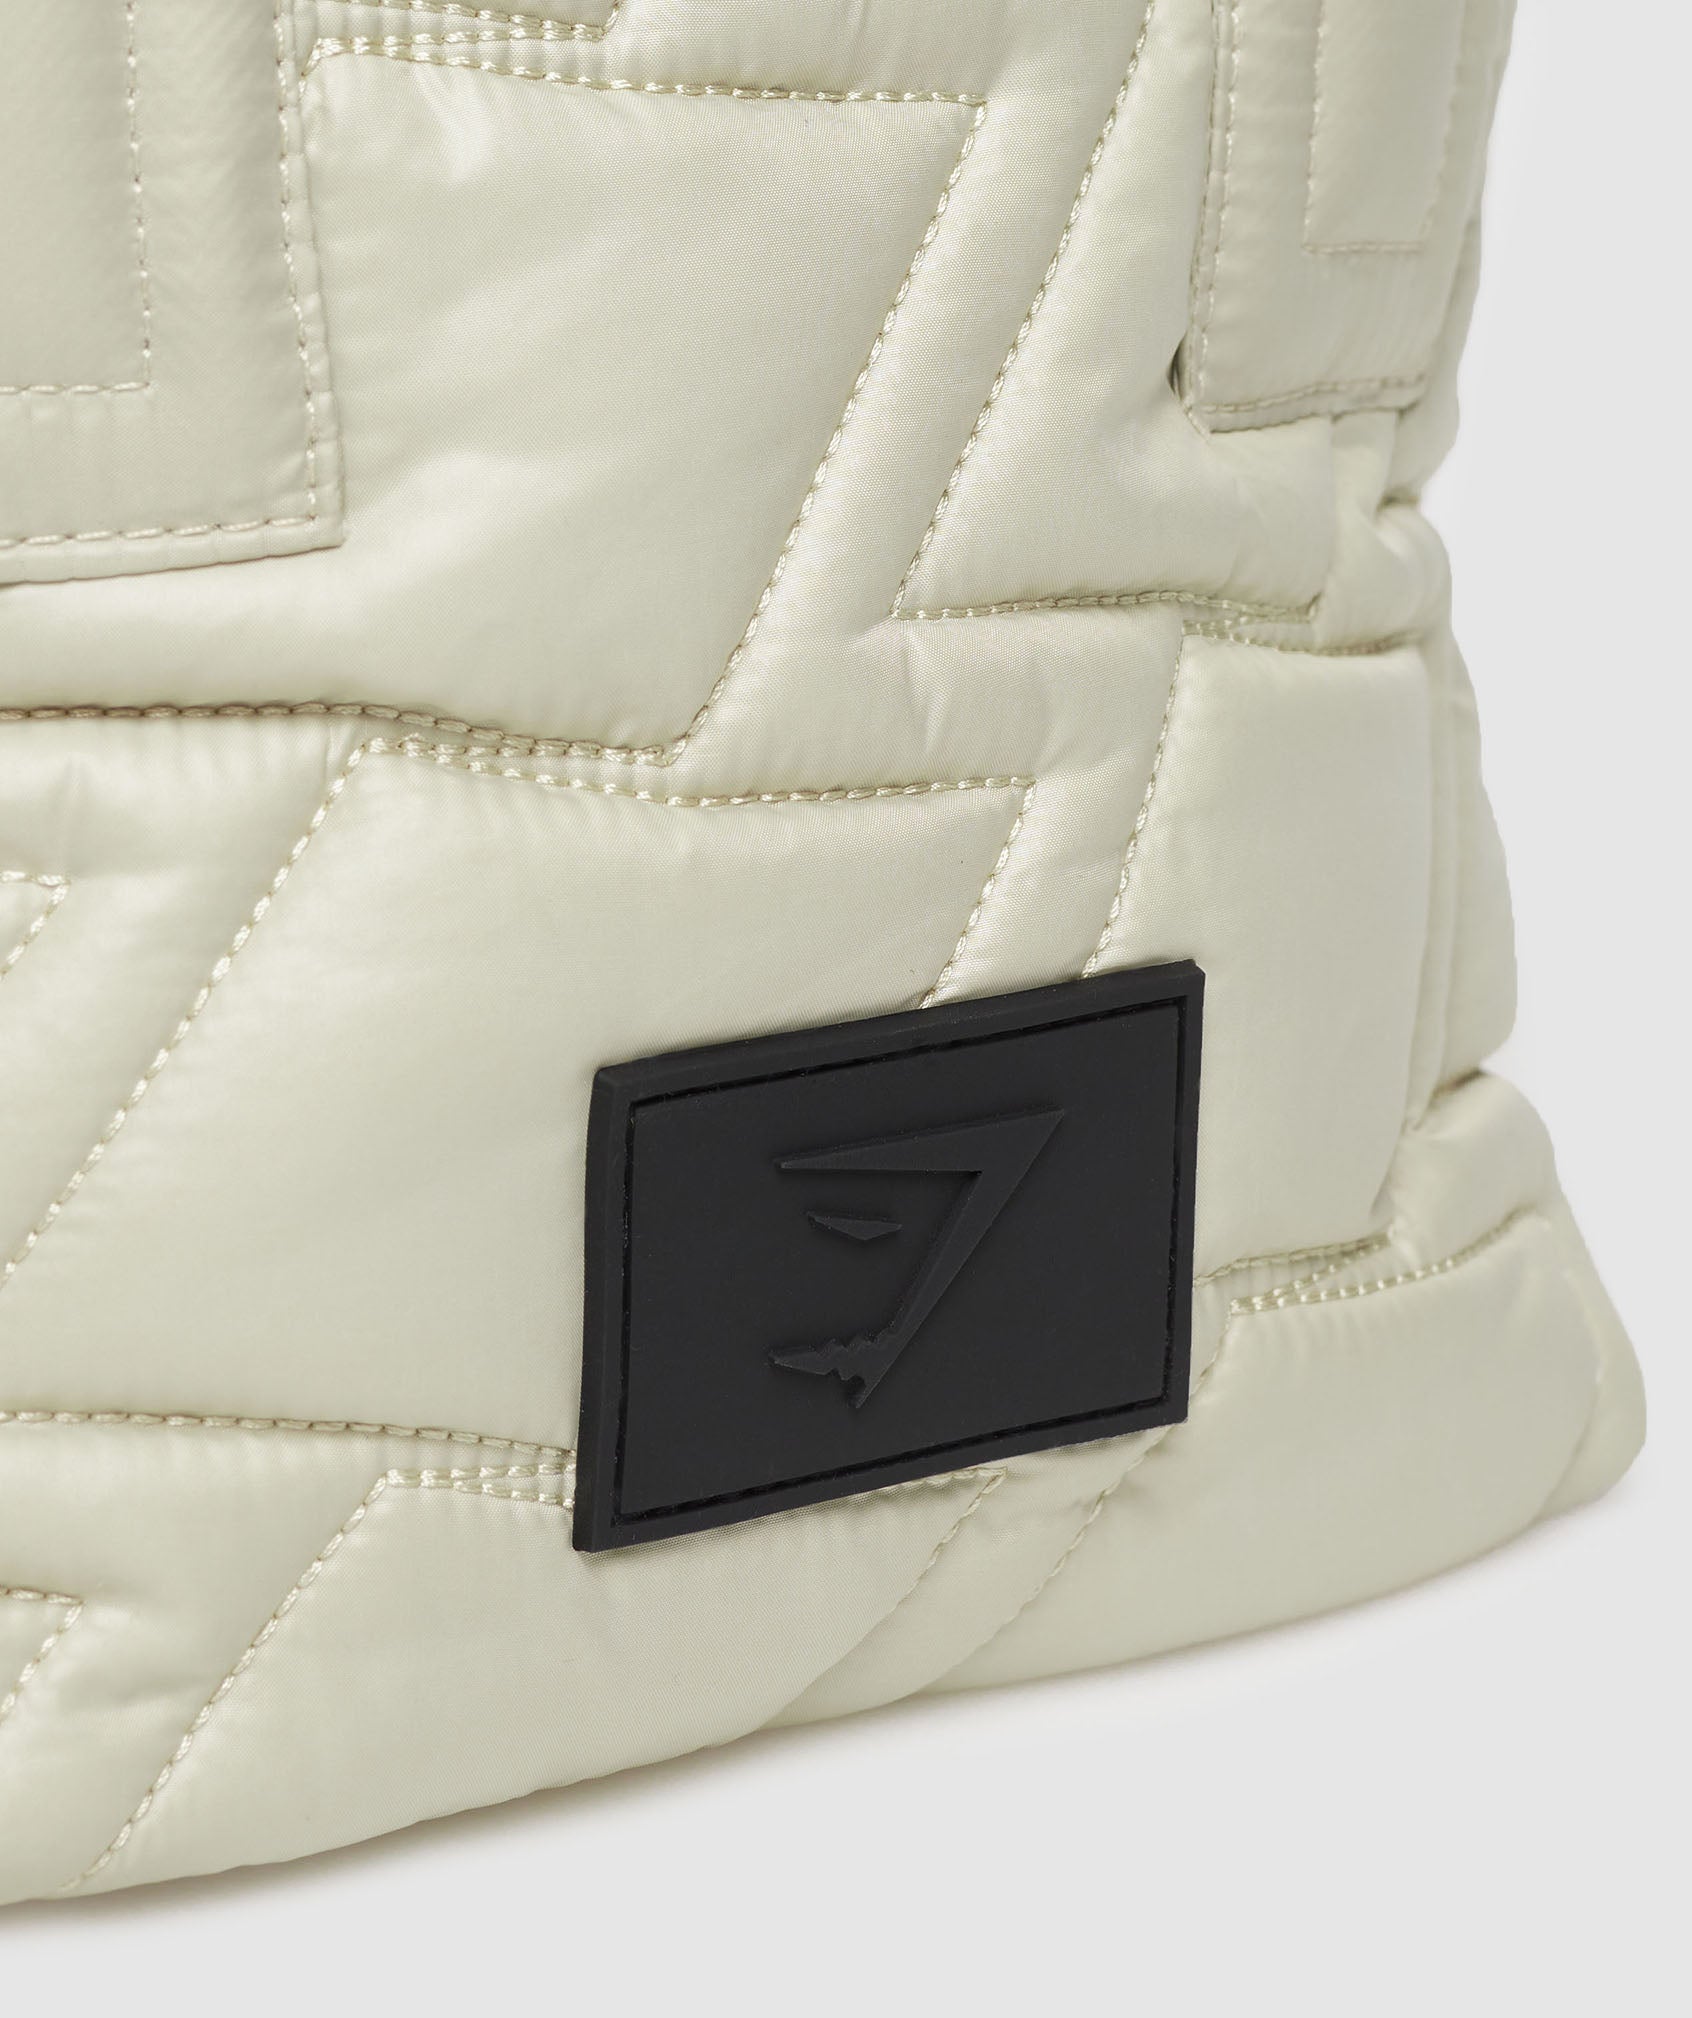 Gymshark Quilted Yoga Tote - Sandy Brown